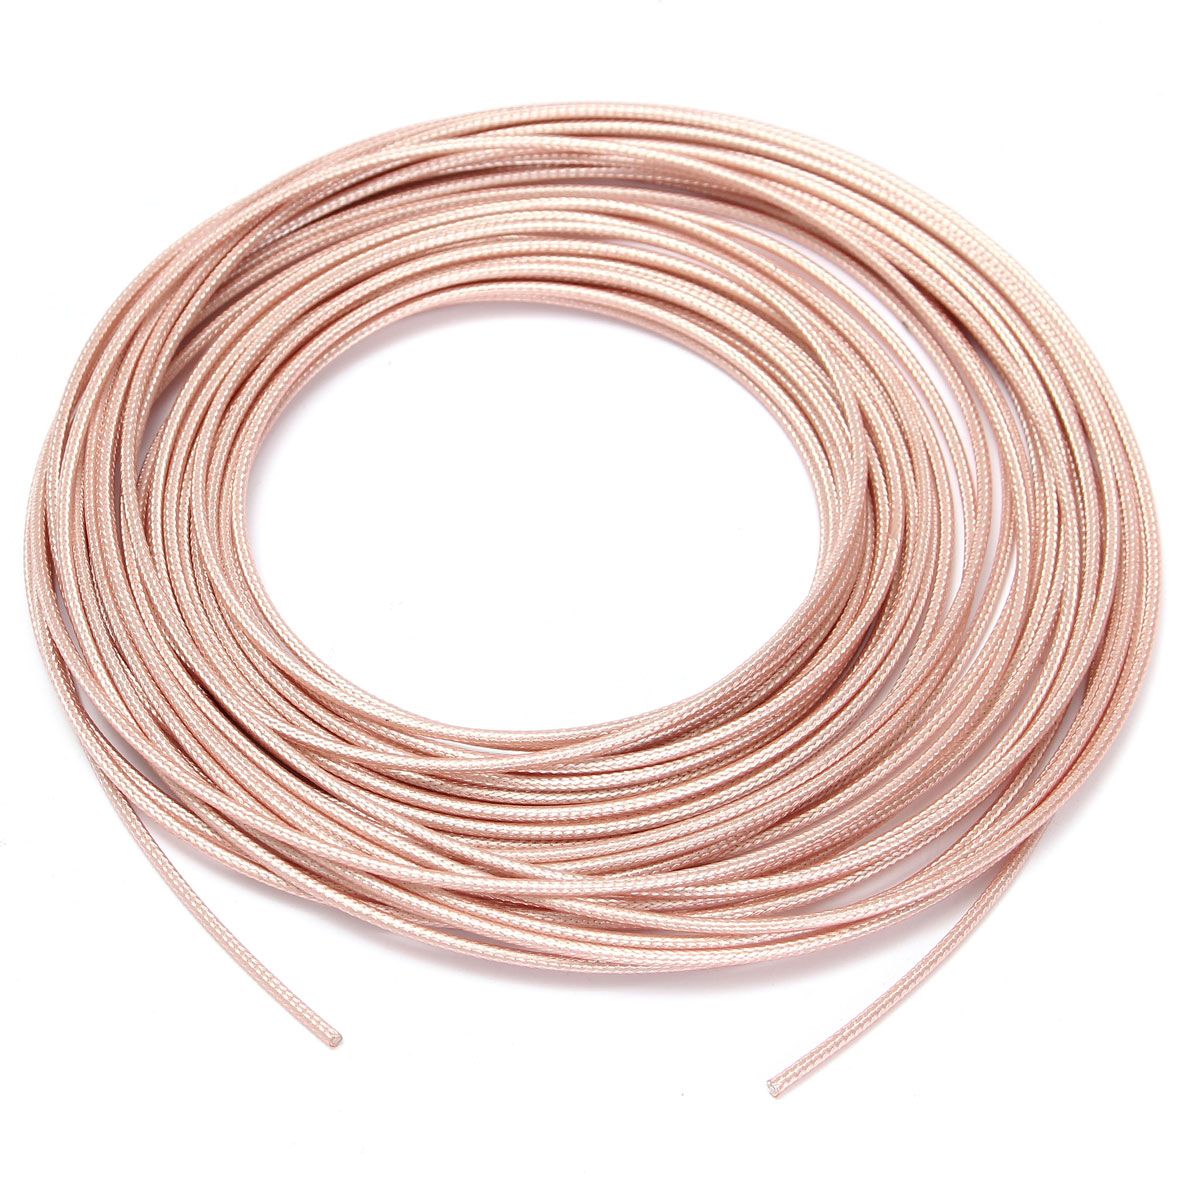 10m-RG316-RF-Coaxial-Cable-Connector-50ohm-M17113-Coax-Pigtail-32ft-1068598